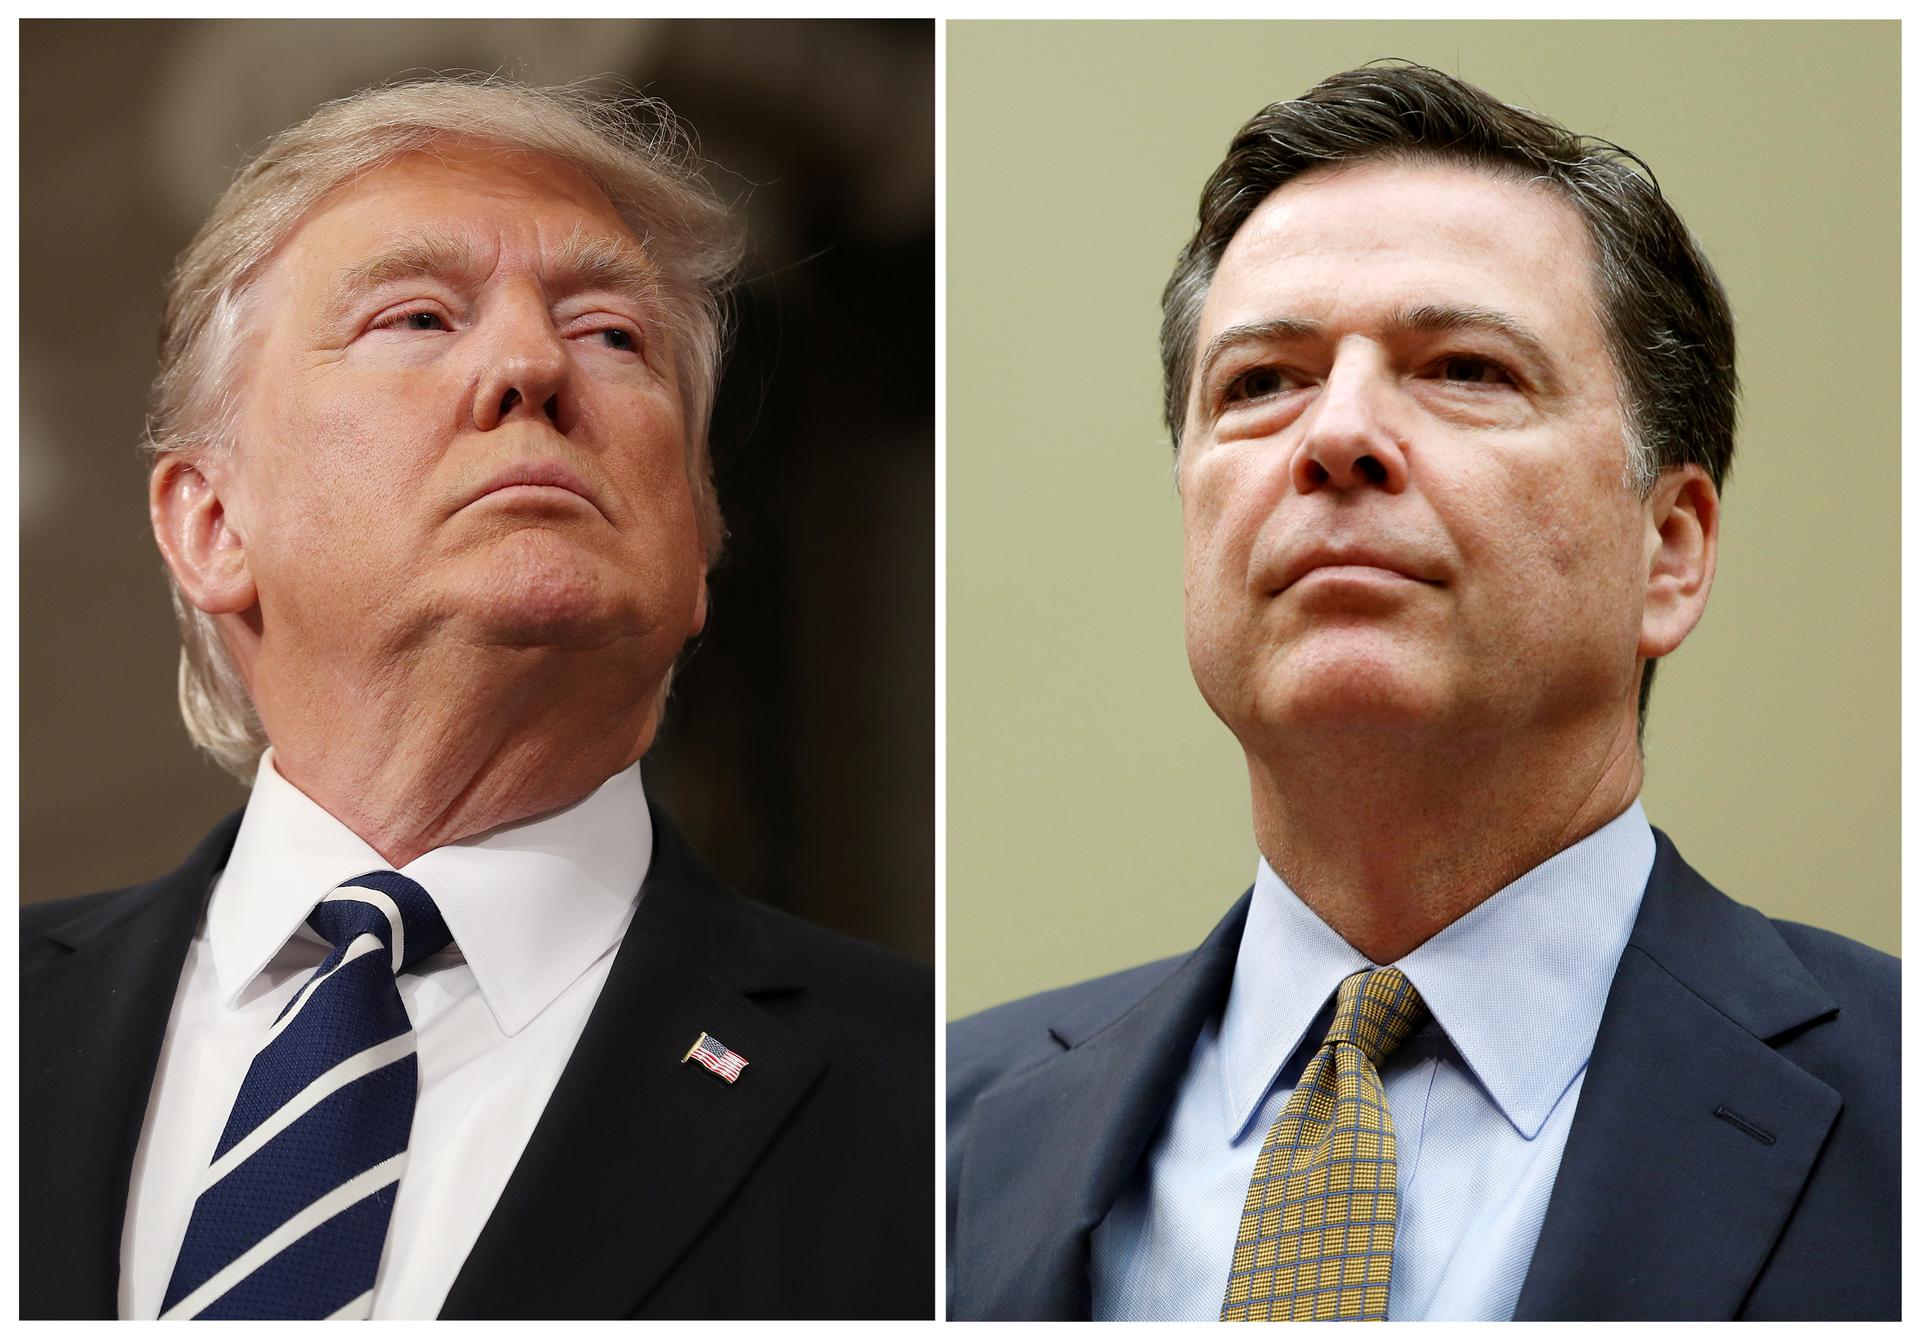 A combination photo shows US President Donald Trump and fired FBI Director James Comey.